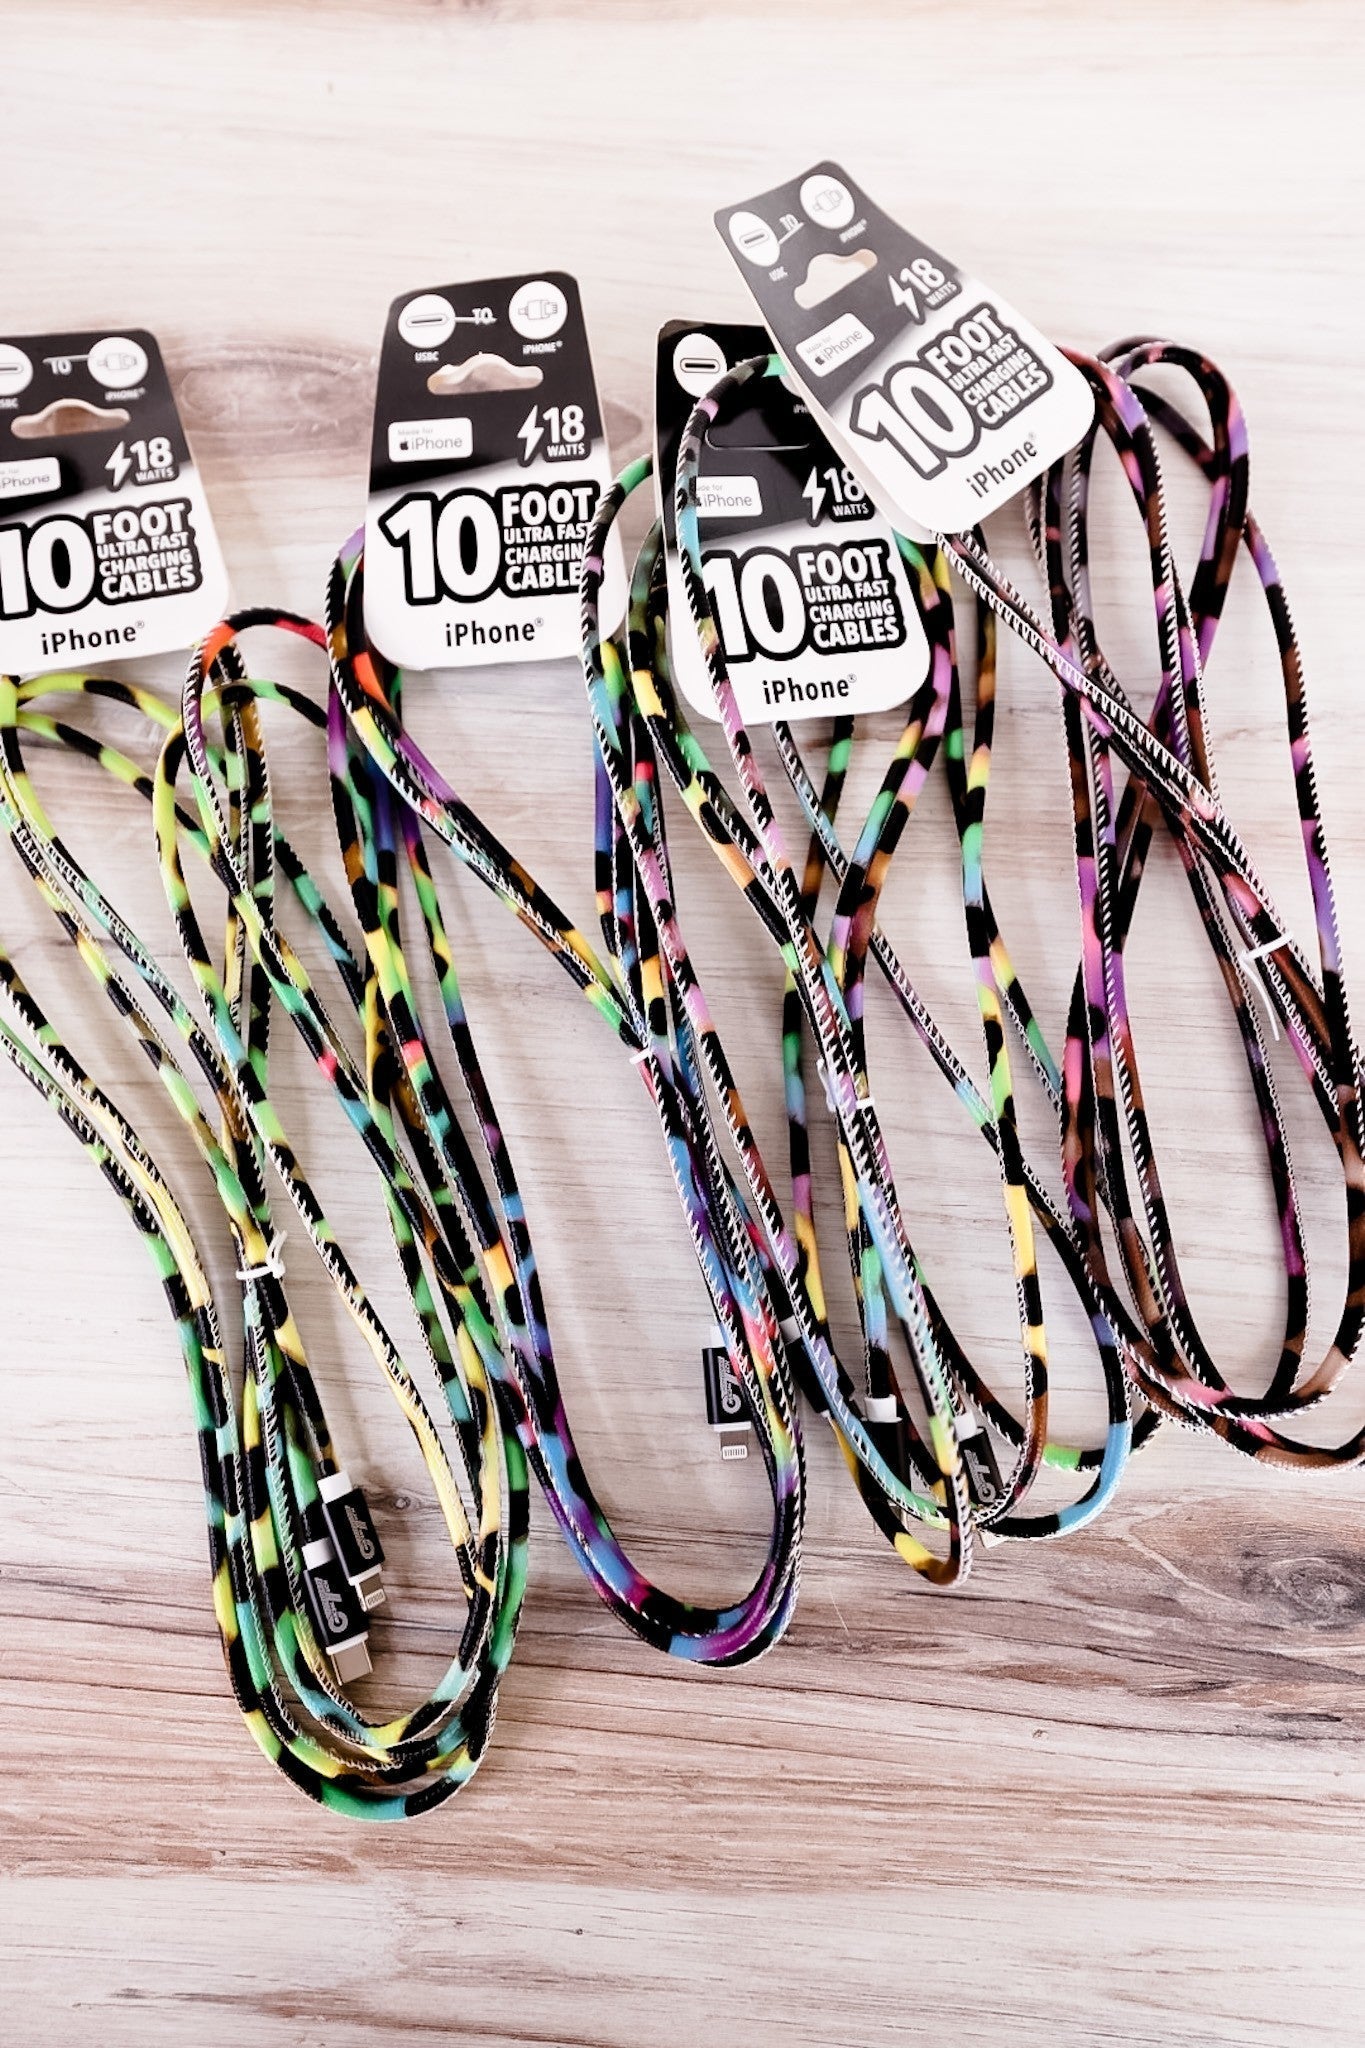 Lightening Fast iPhone 10ft Cable Wild Mix (Assorted) - Whiskey Skies